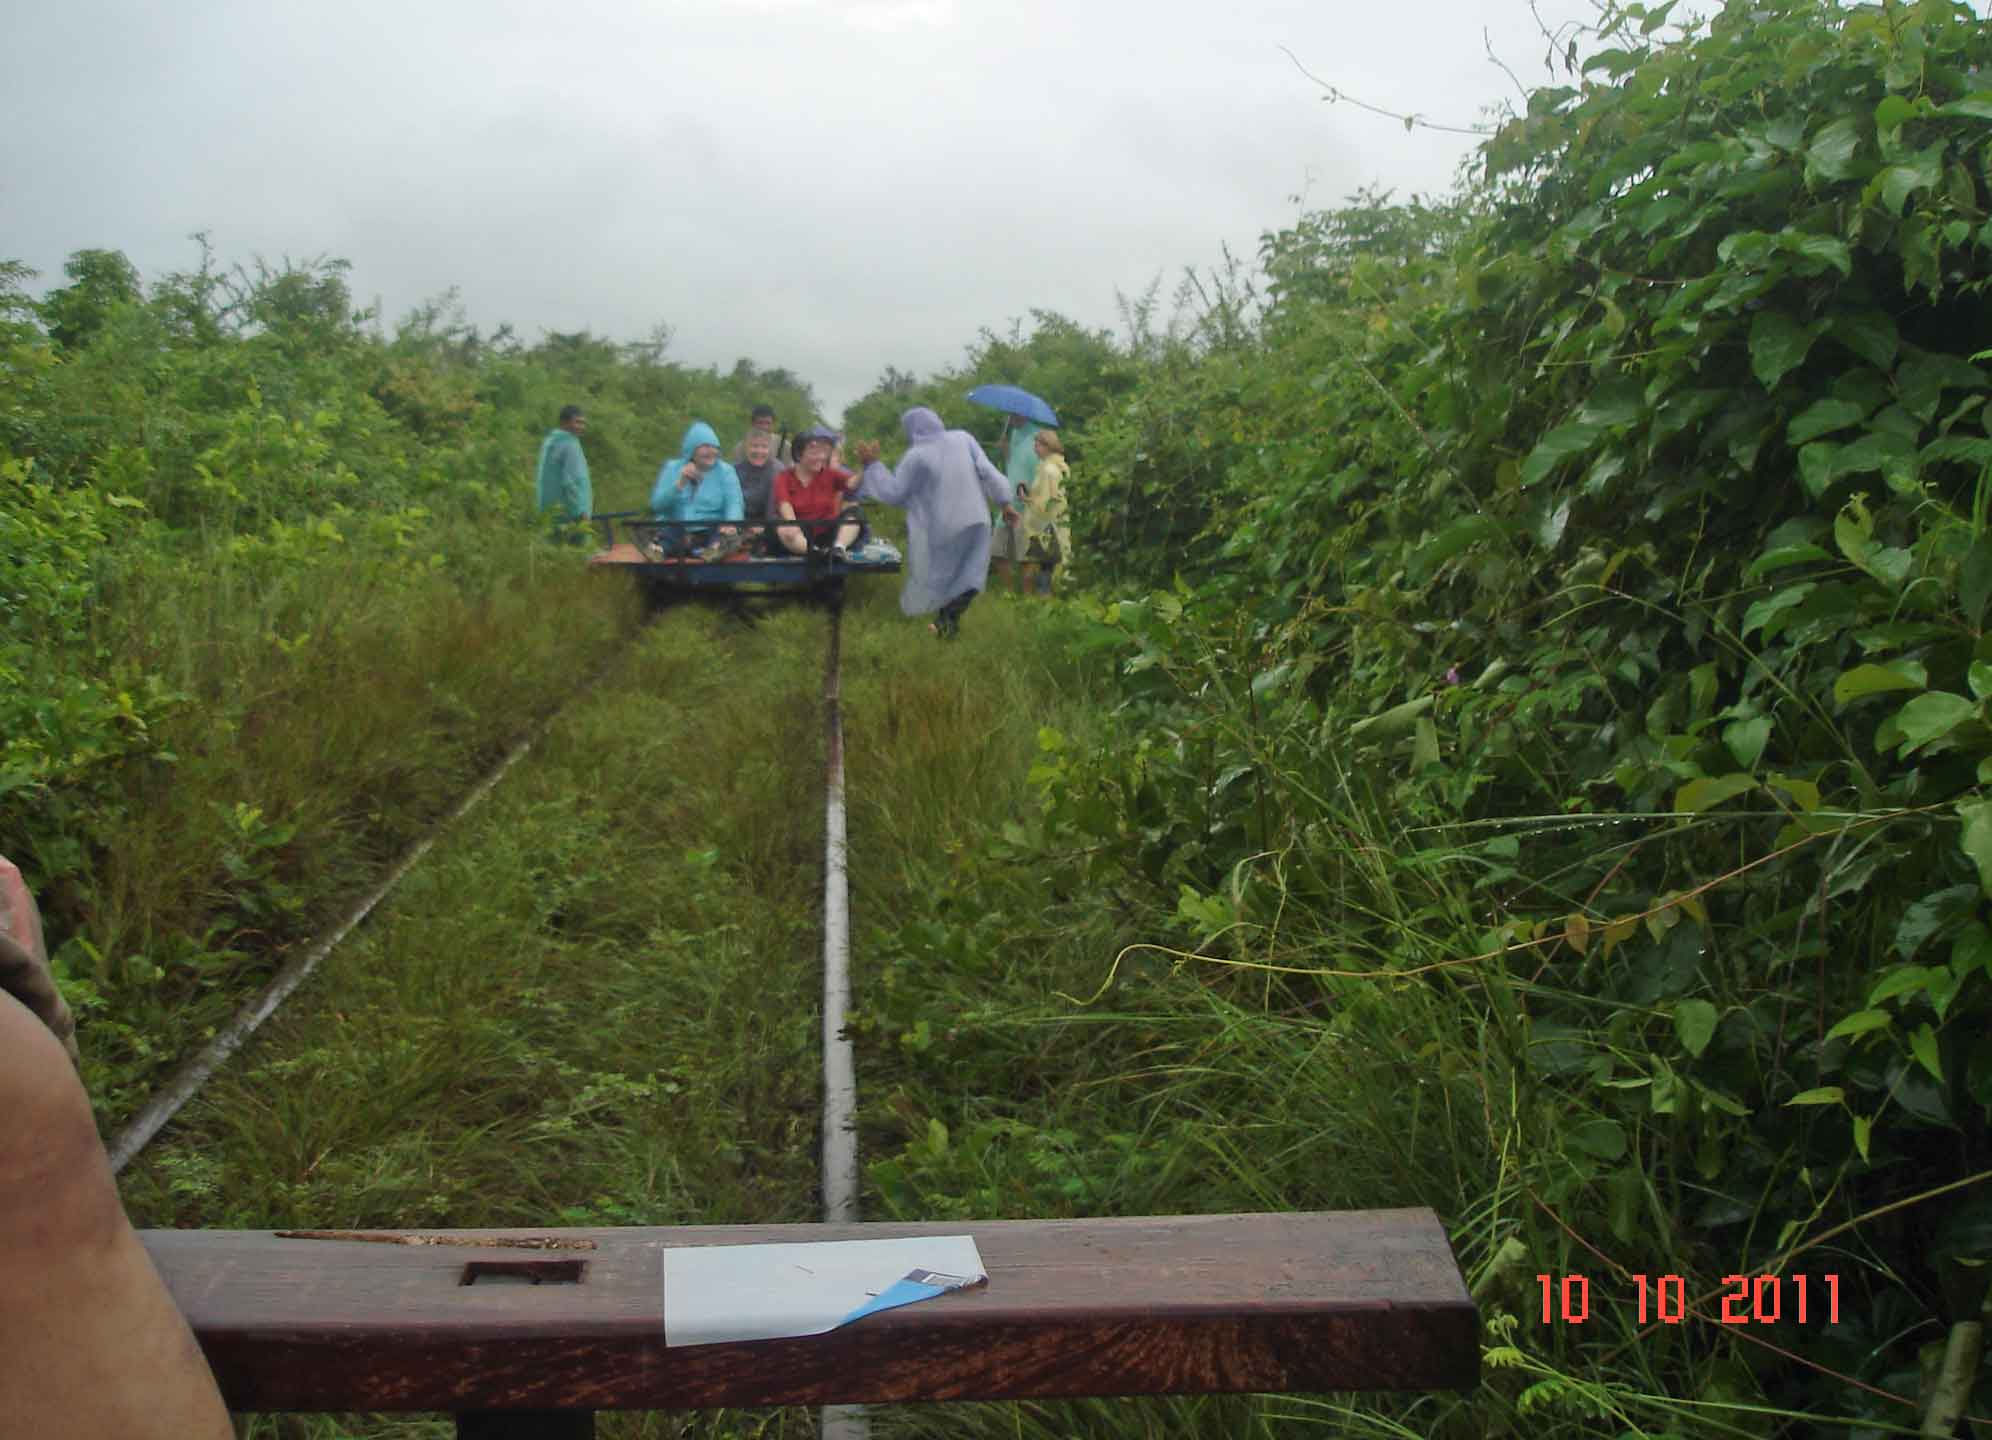 What now, another Norry? In the jungle, in the rain-adventure on a bamboo train!